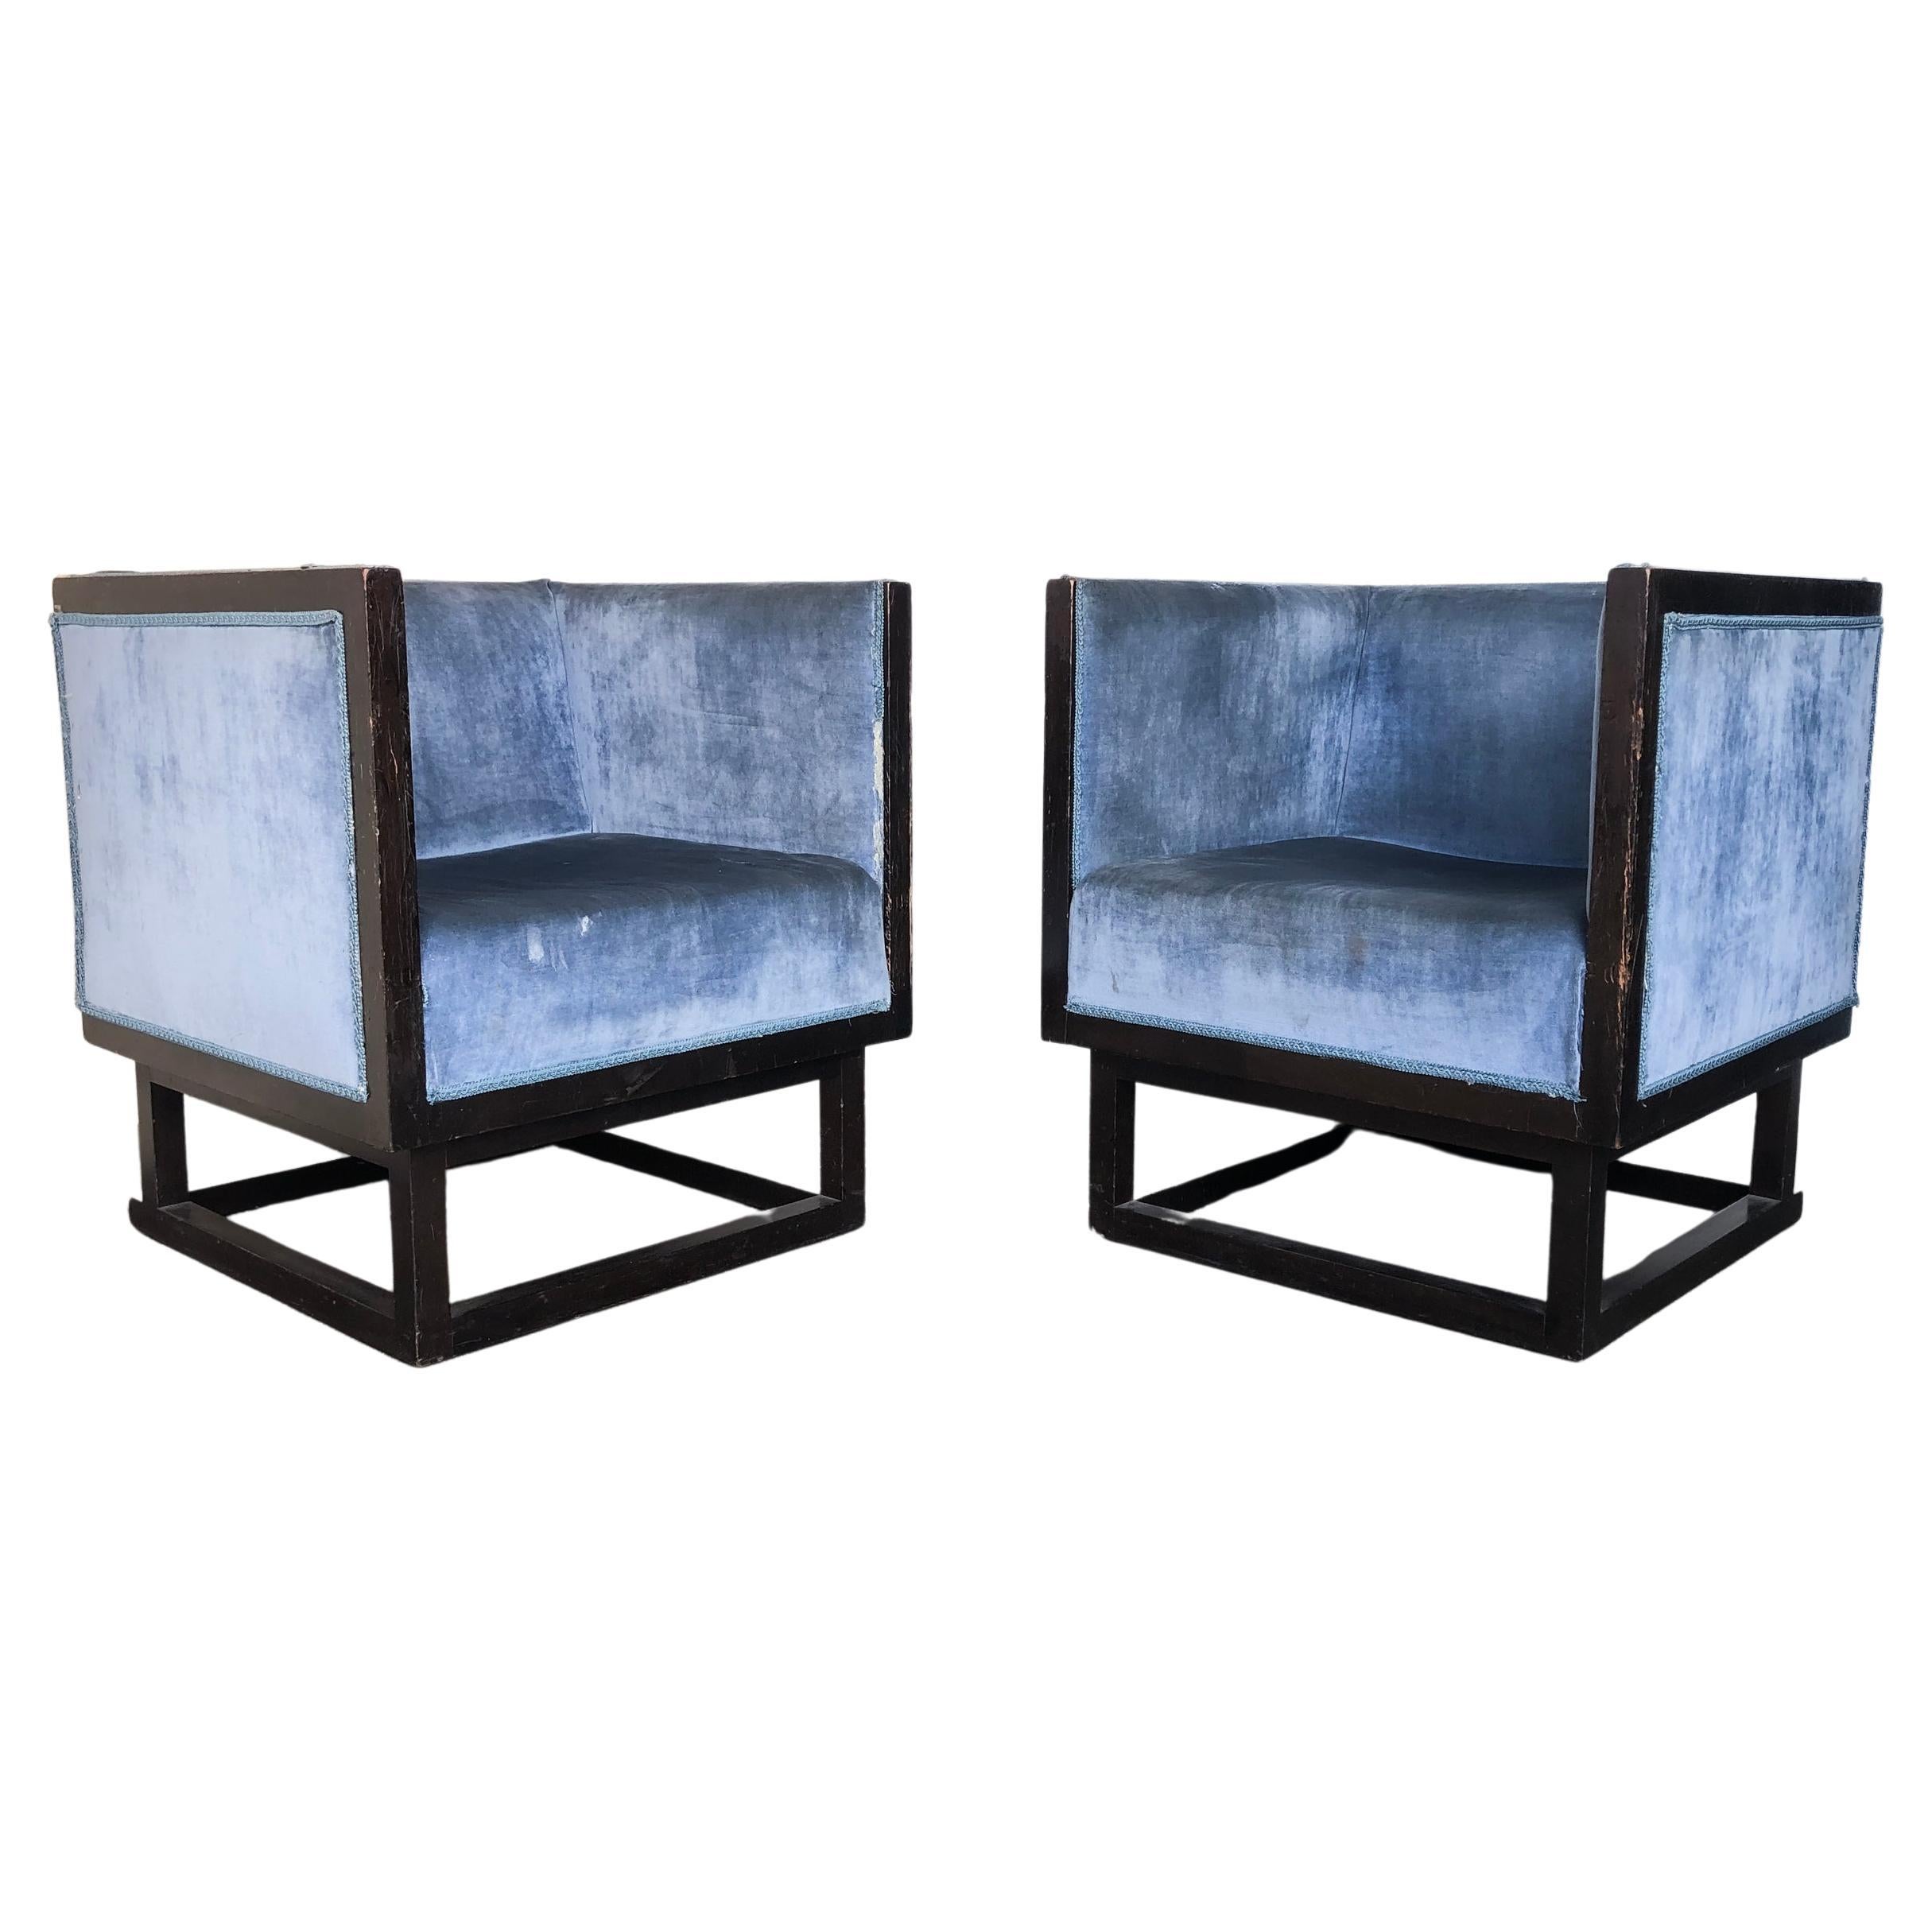 Pair of Rare Josef Hoffmann Cabinet Chairs by Wittmann Austria 1903 For Sale